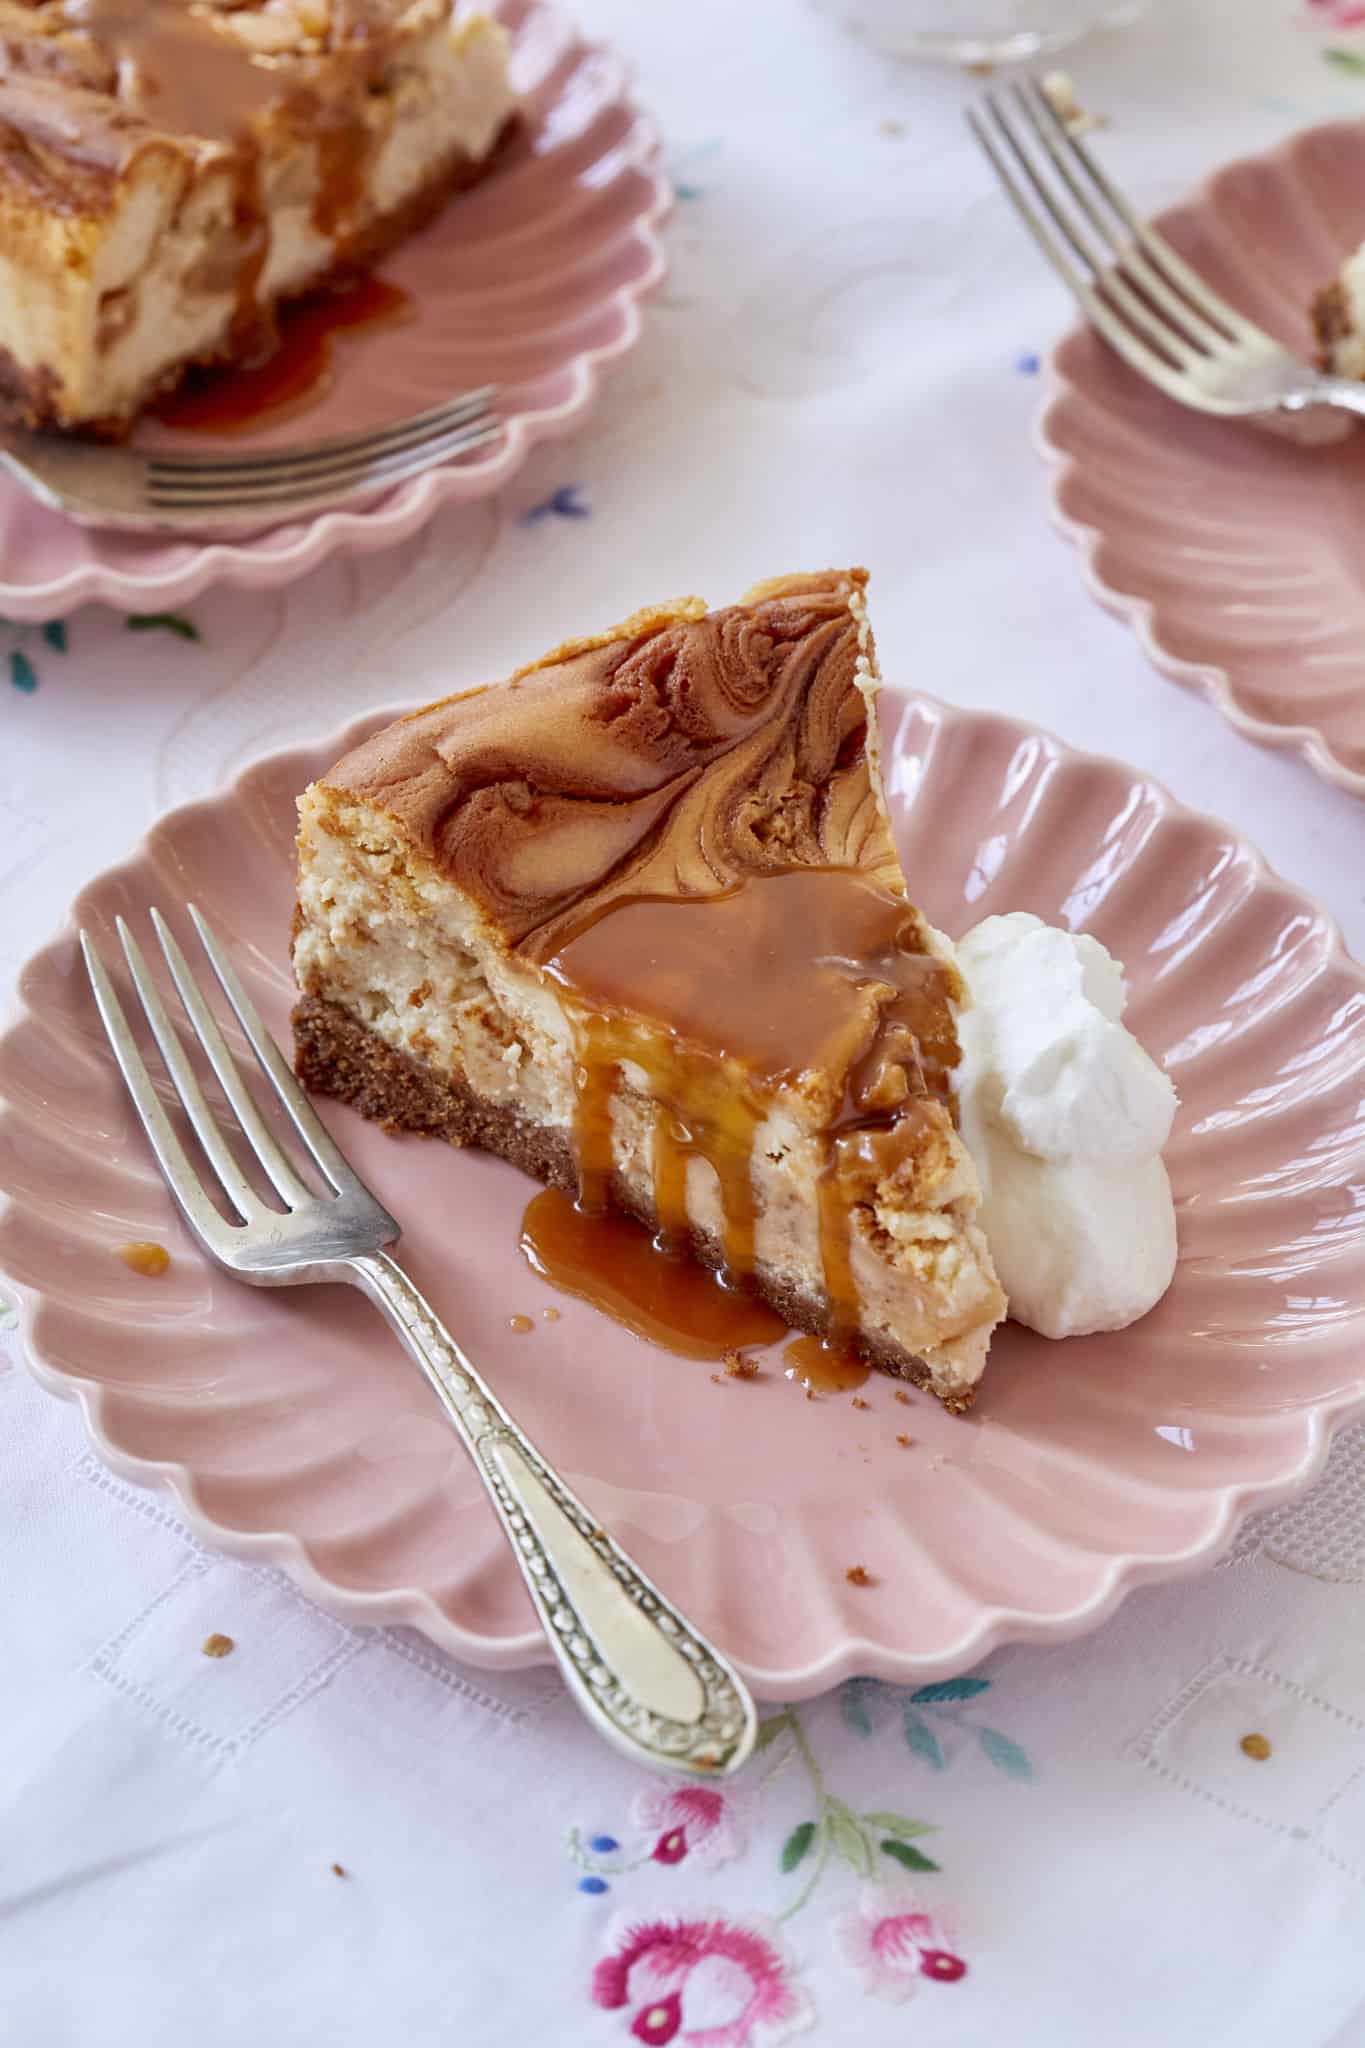 A close up image of the homemade cheesecake shows the cookie crust, jiggly middle, and caramel sauce topping.